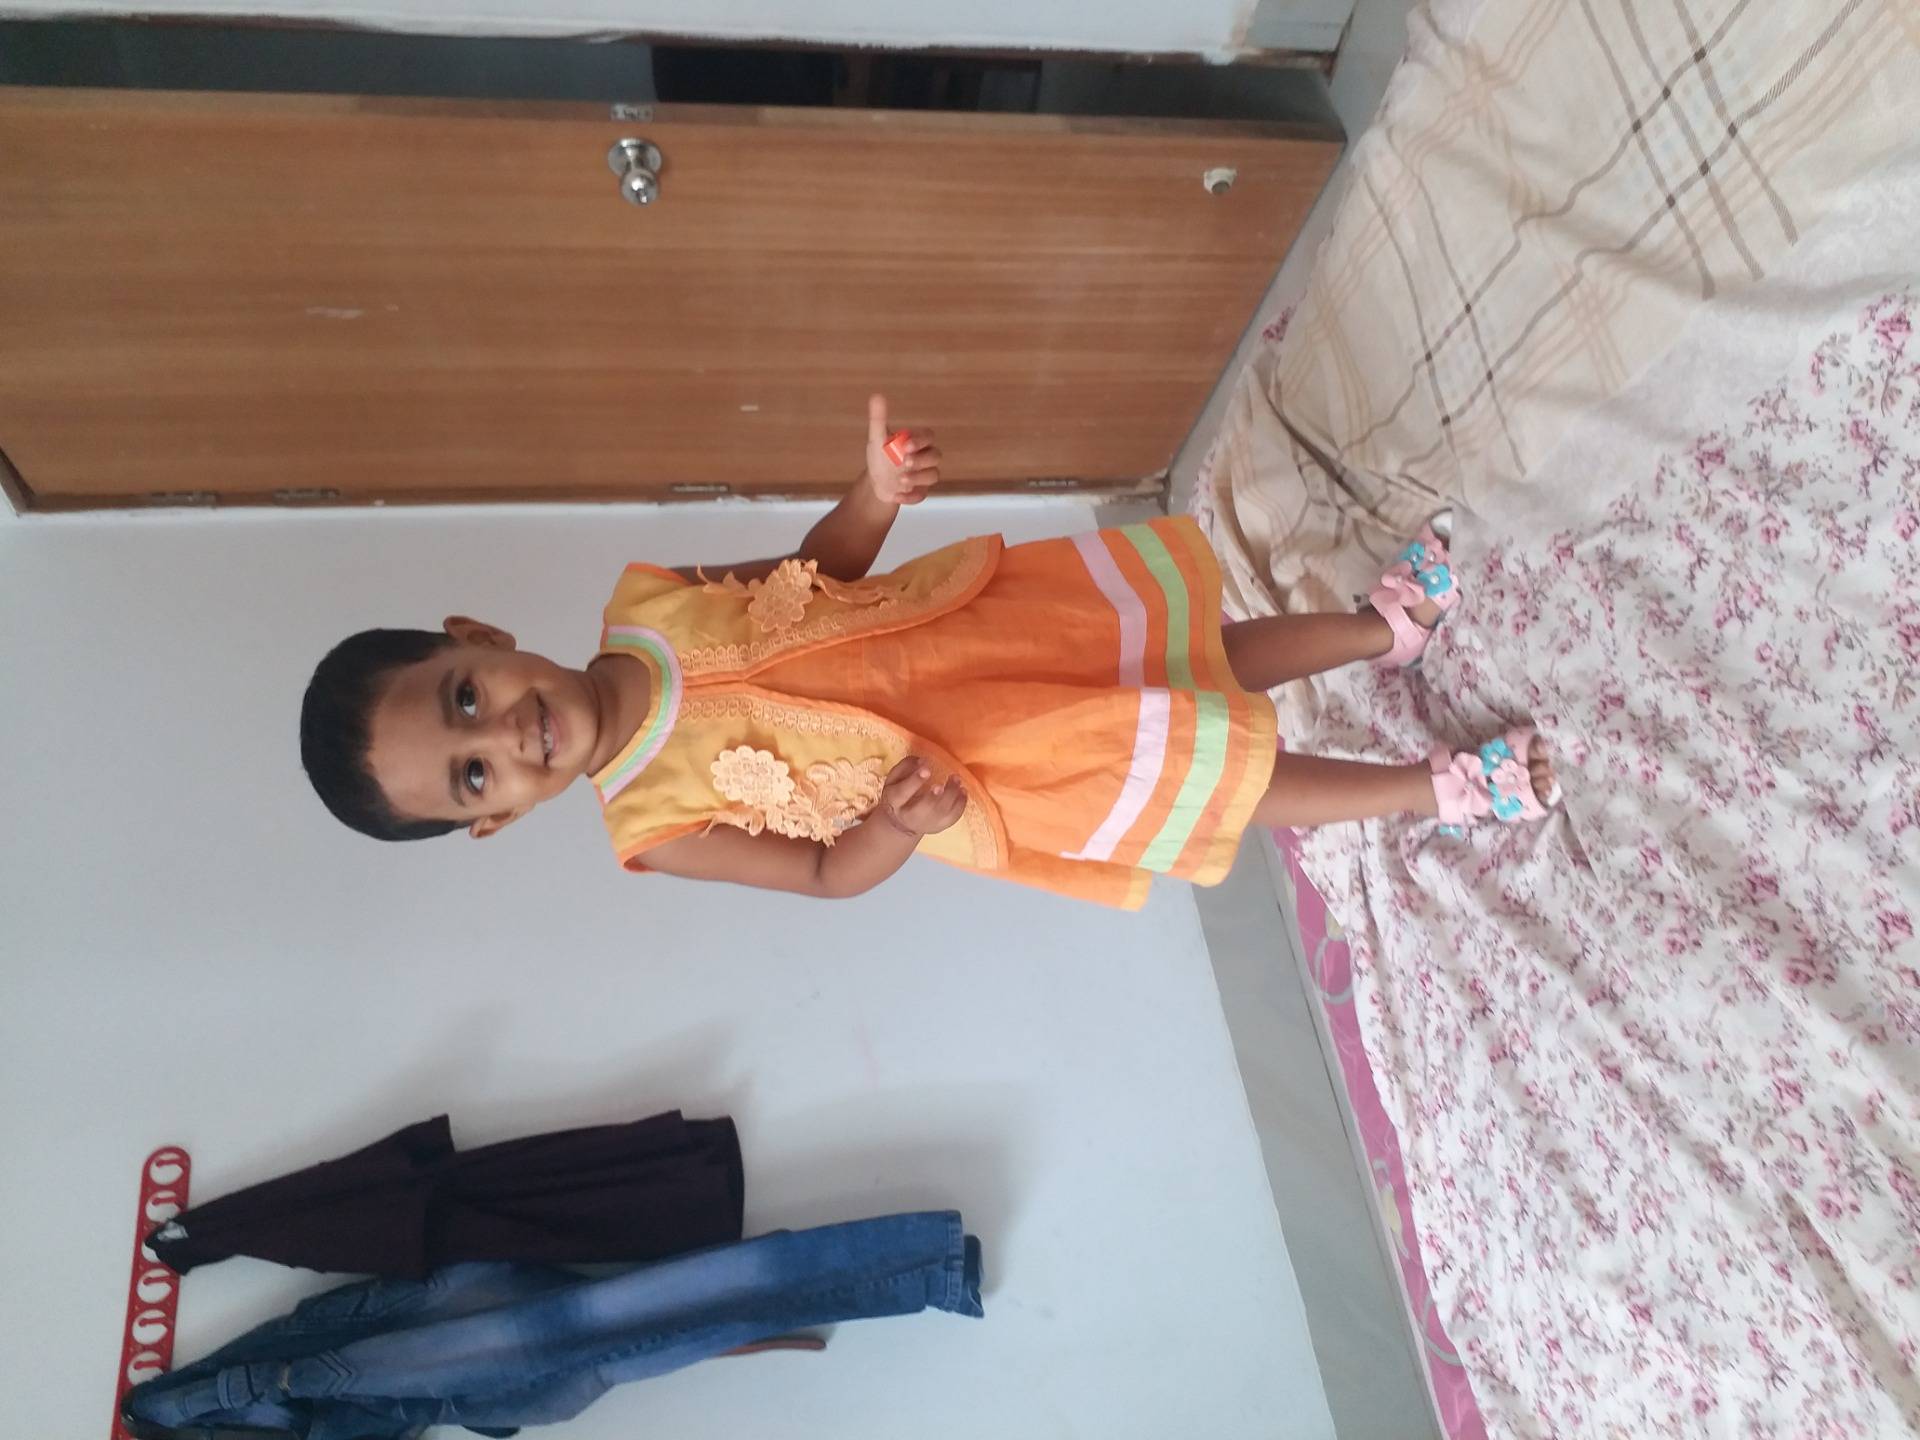 Masud's cute younger daughter